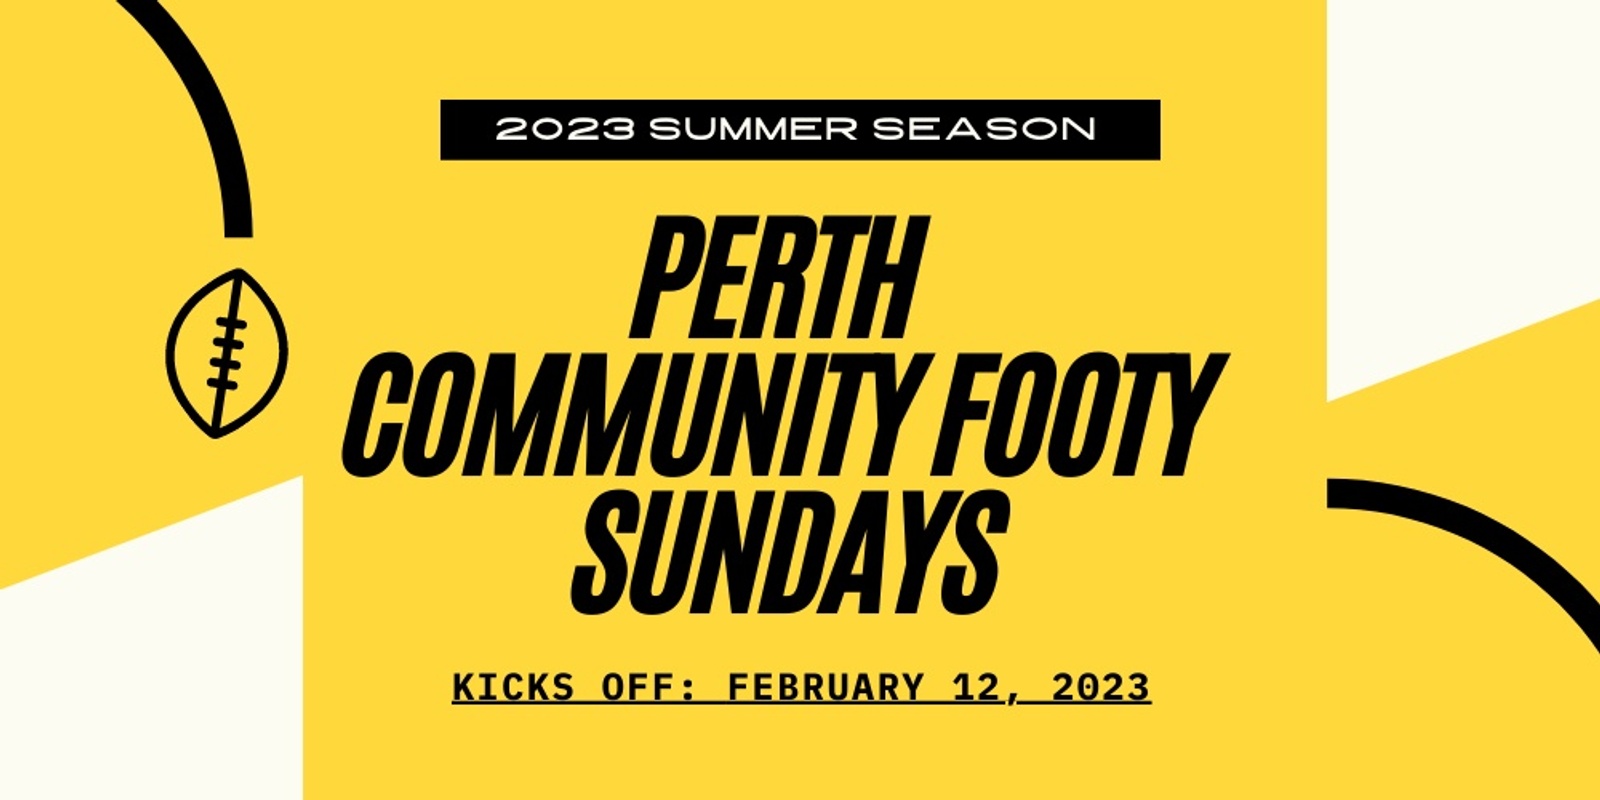 Banner image for Perth Community Footy 